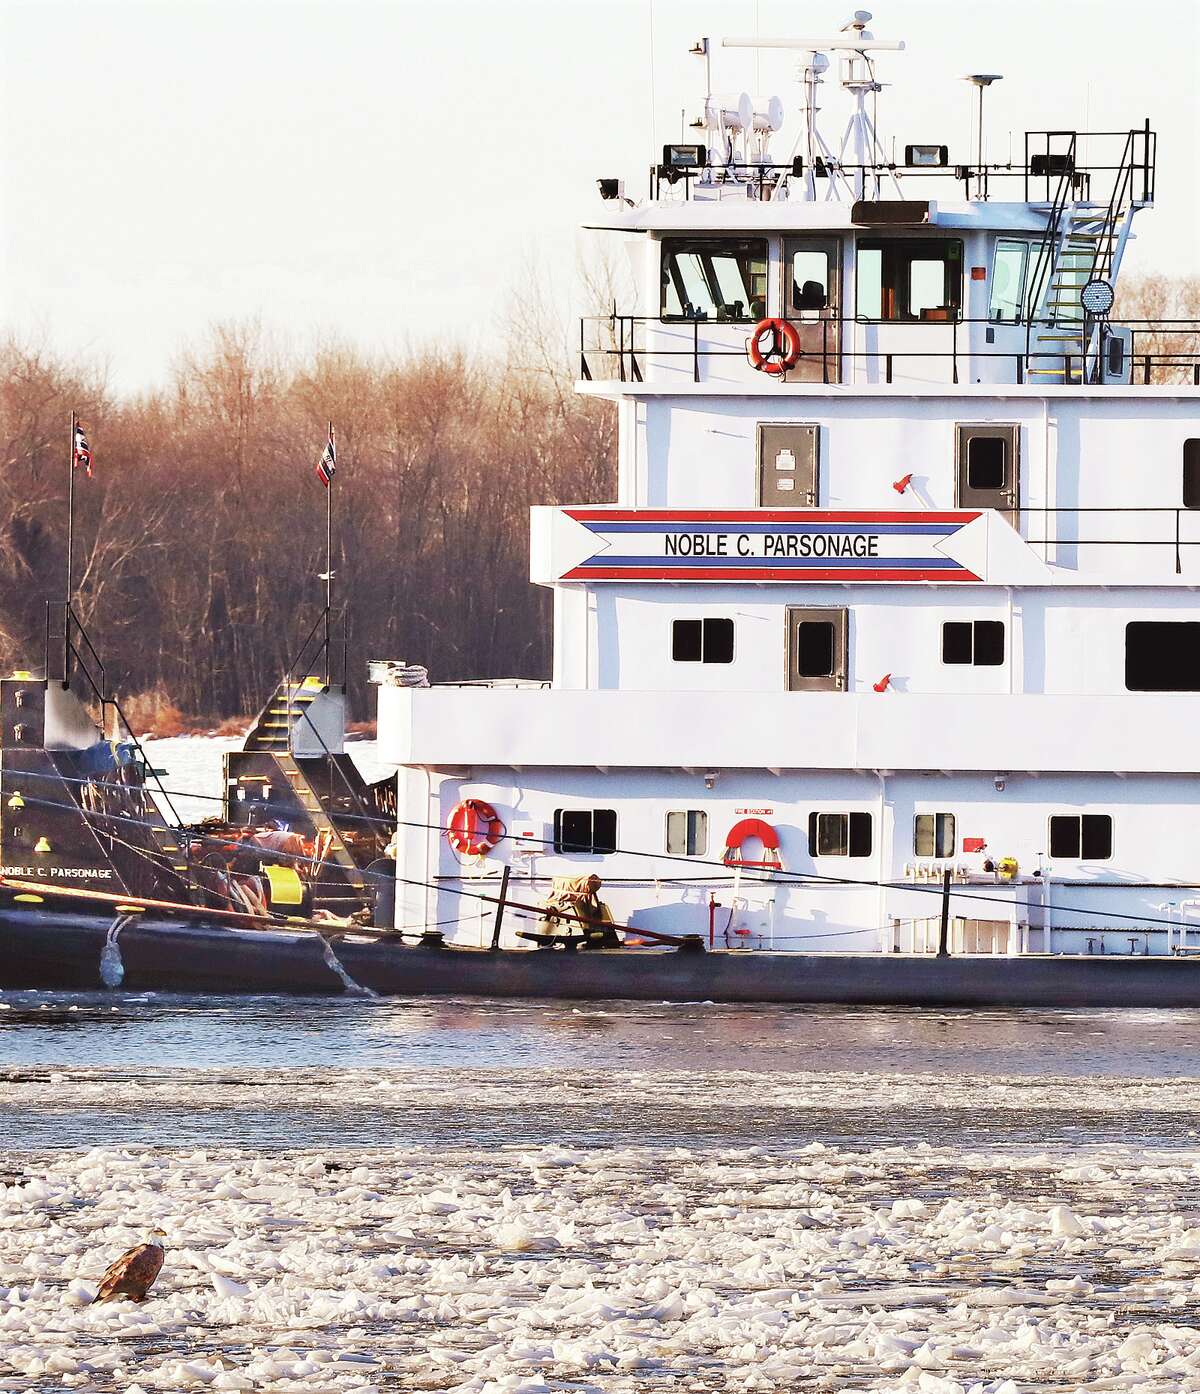 John Badman|The Telegraph A lone eagle was sitting on the slow moving ice flow of Alton Lake in Godfrey Thursday. The hungy bird of prey was paying no attention to the barges being pushed past him by the towboat Noble C. Parsonage.